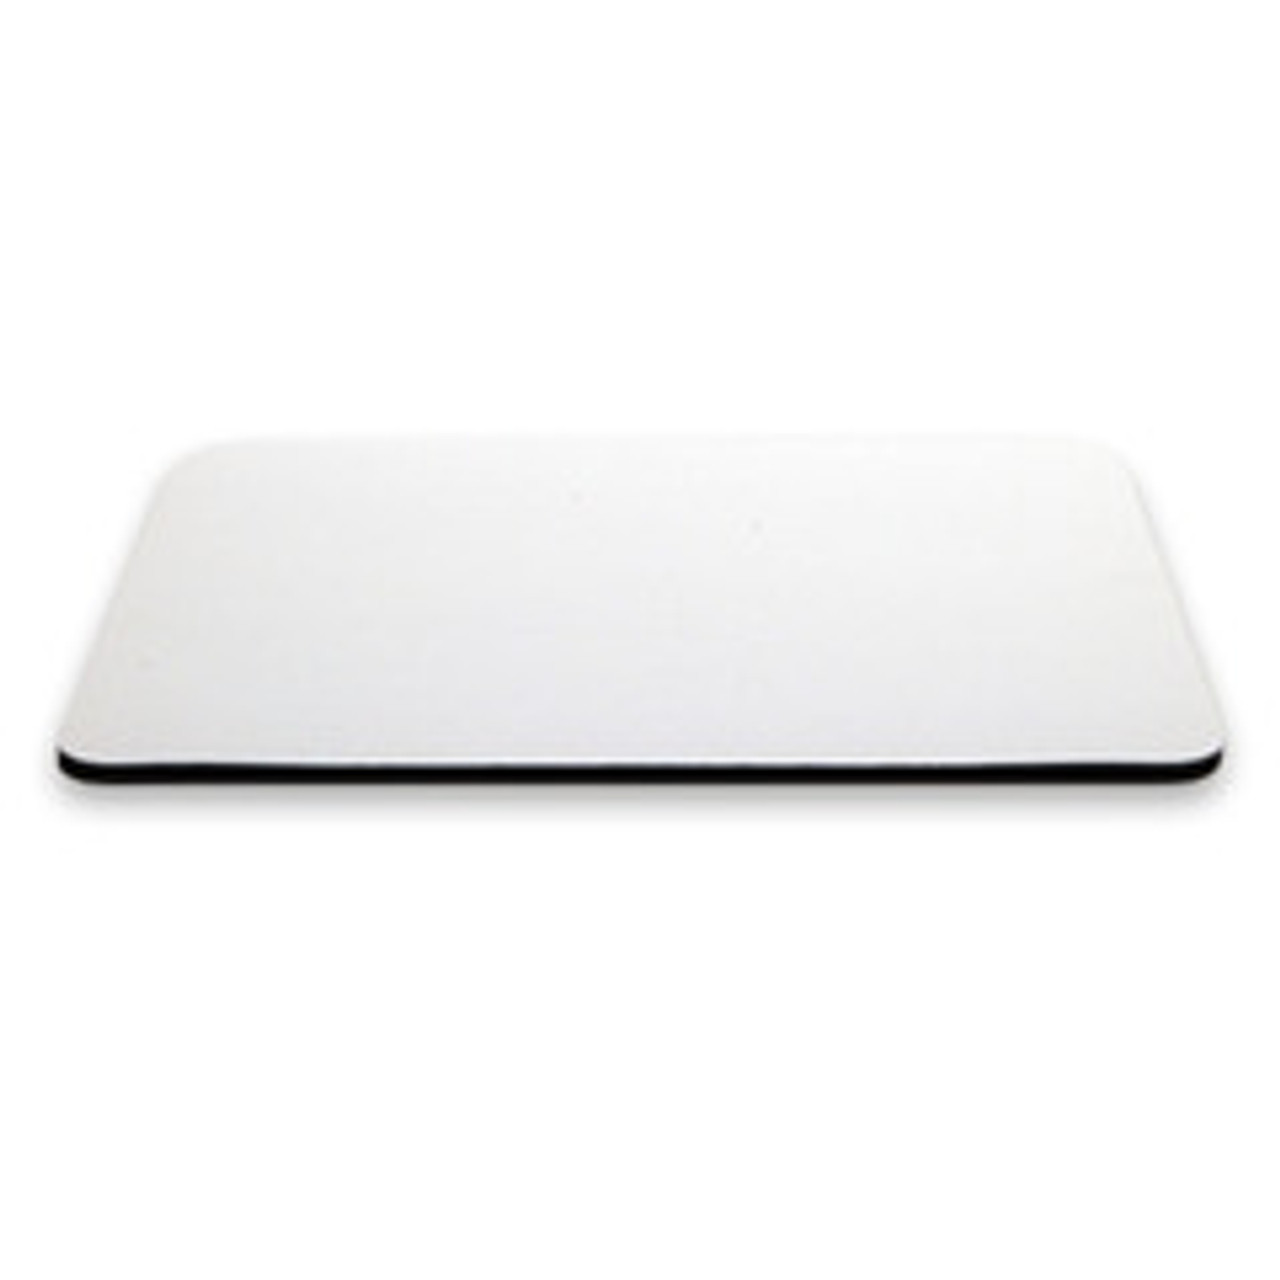 Blank Mouse Pad - 5mm - USCutter